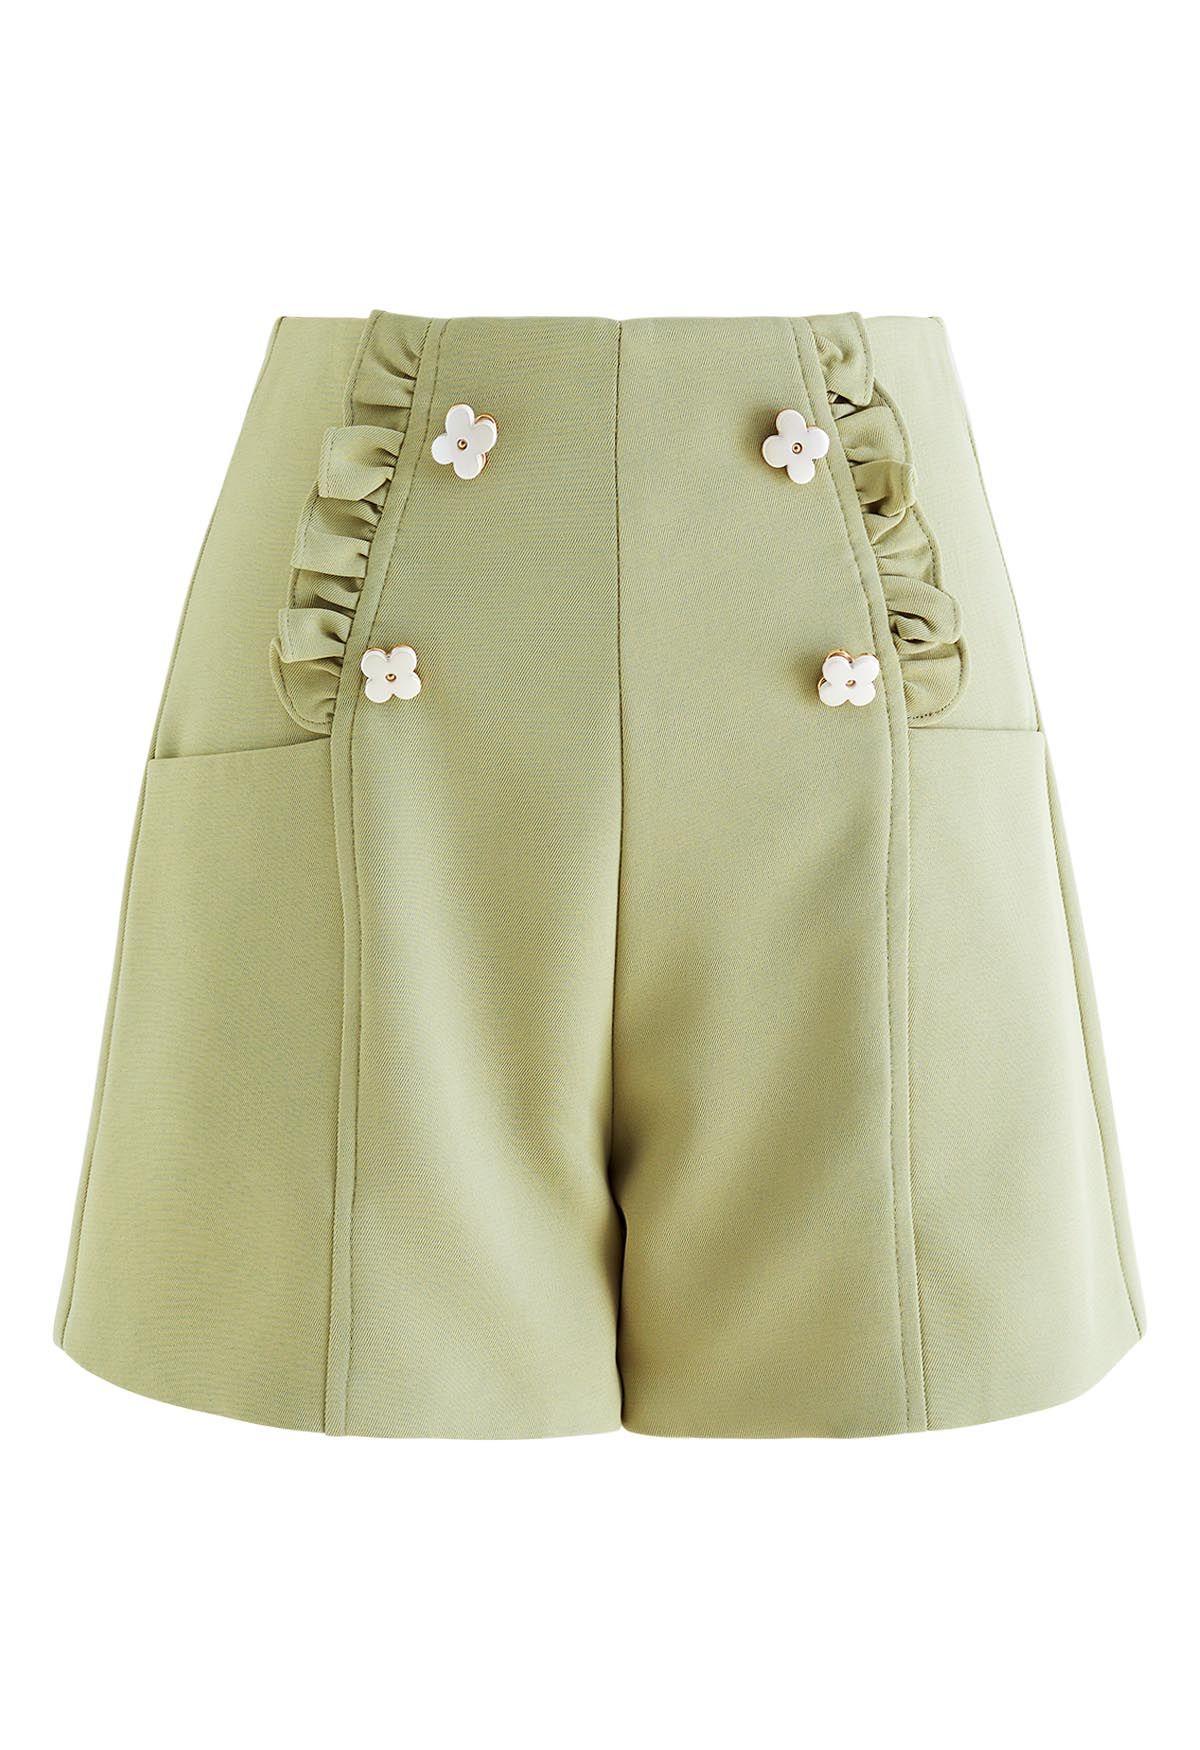 Adorable Flower Ruffle Trim Shorts in Pea Green - Retro, Indie and ...